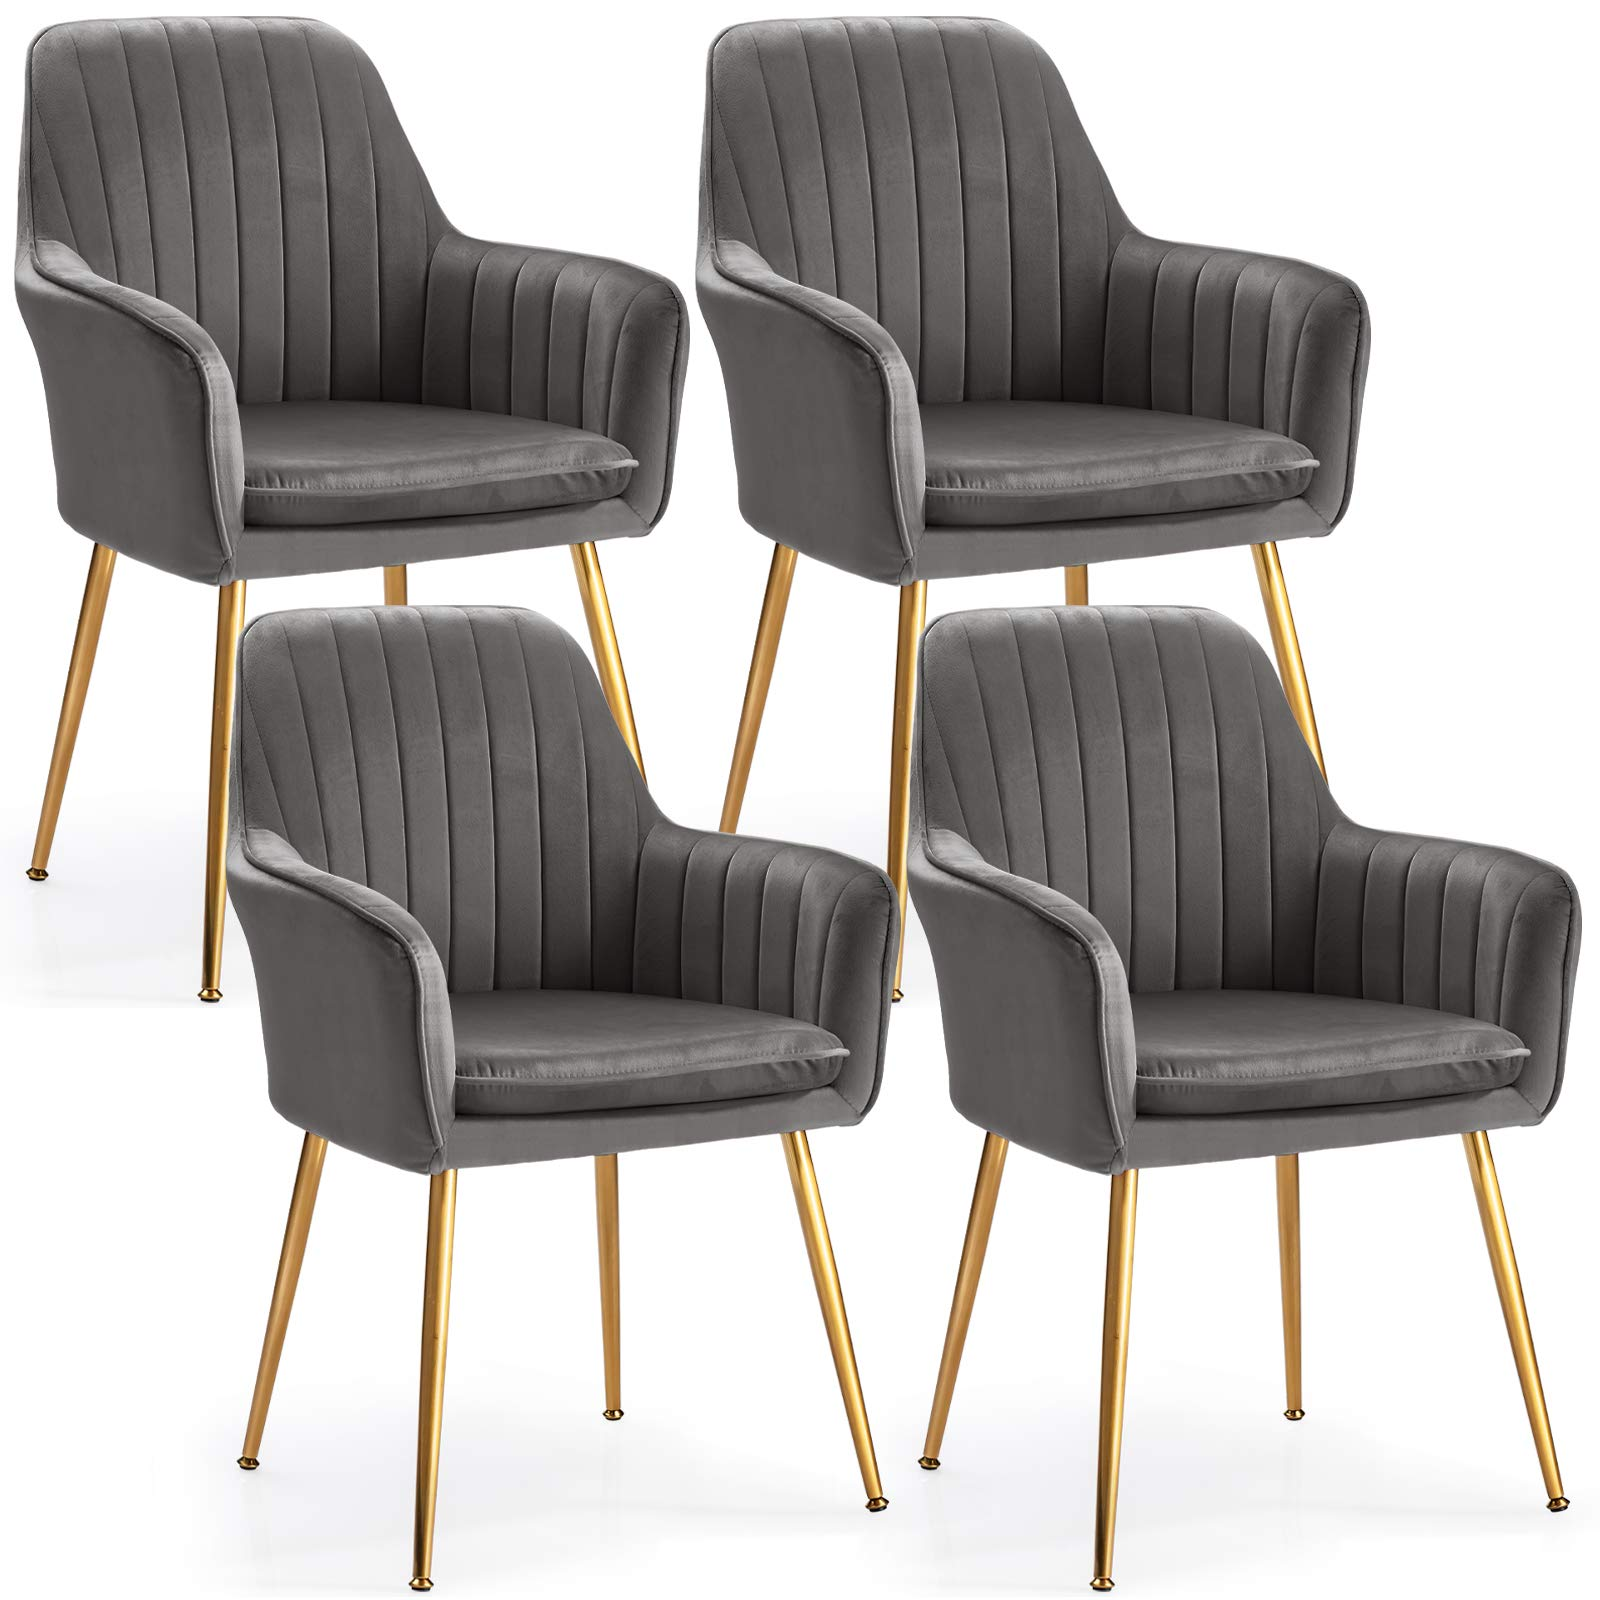 Giantex Velvet Dining Chairs, Accent Upholstered Arm Chair w/Steel Legs, Thick Sponge Seat